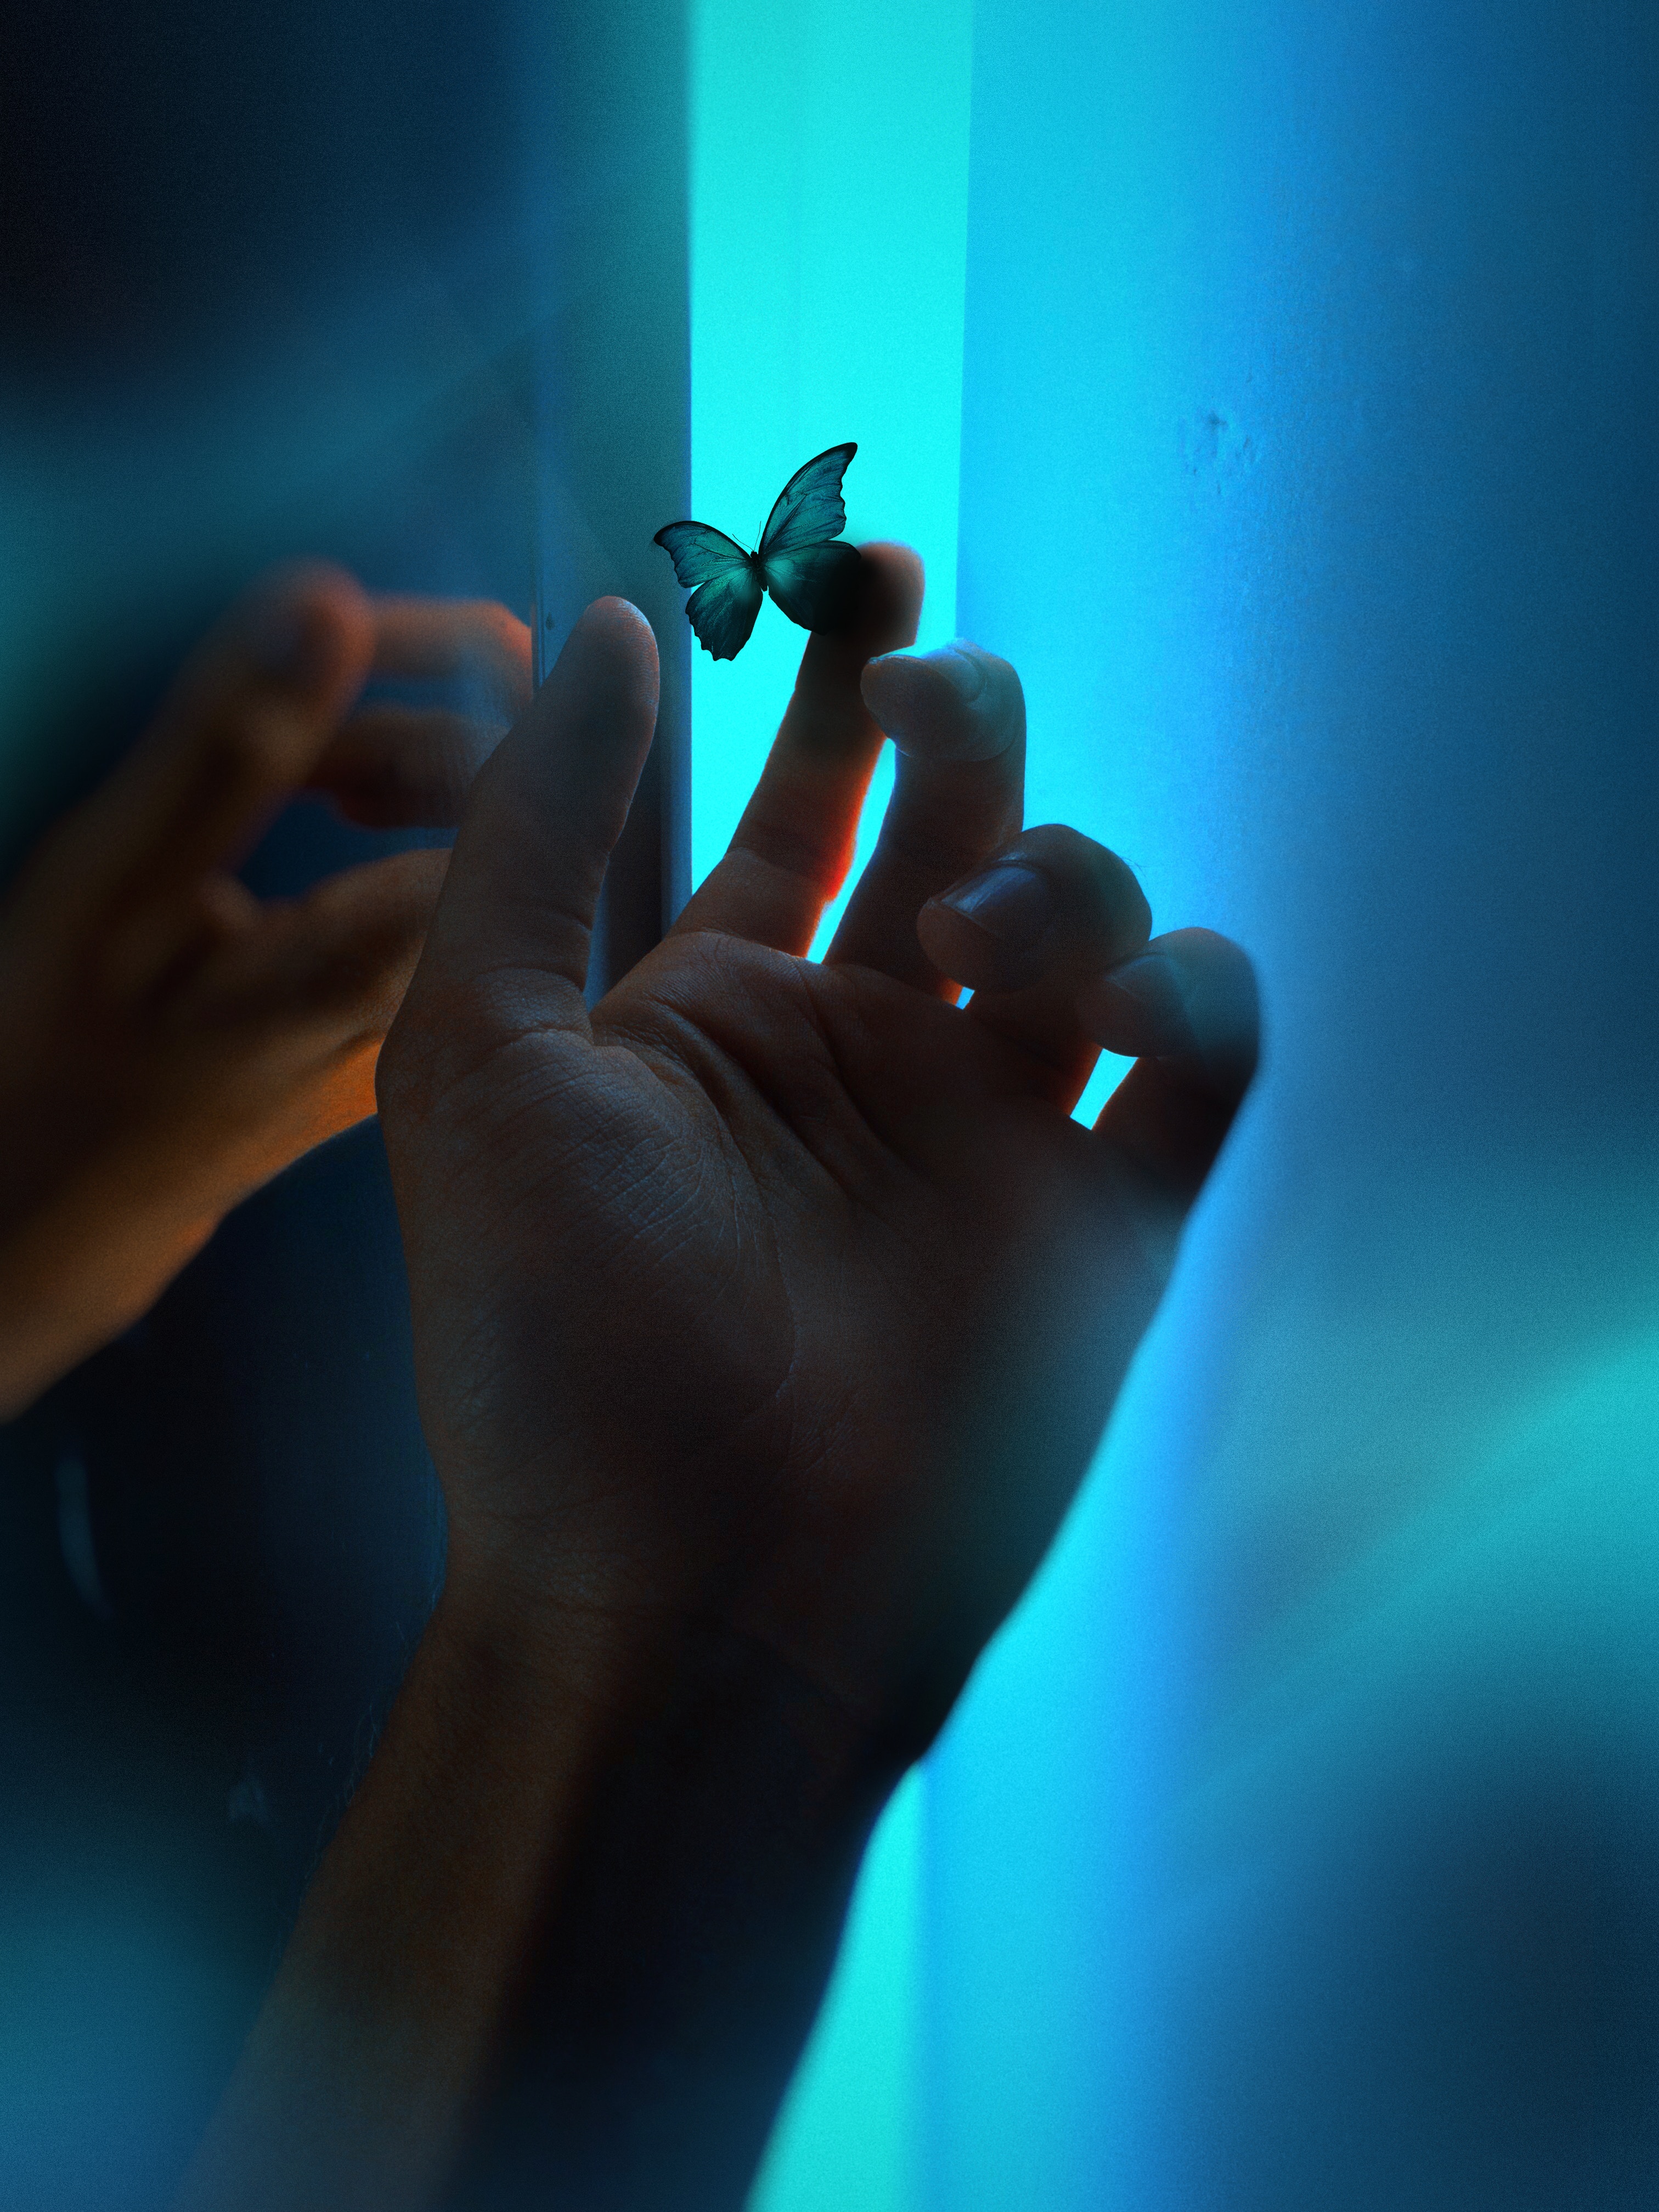 butterfly, blue, hand, miscellanea, miscellaneous, neon, glow, fingers iphone wallpaper